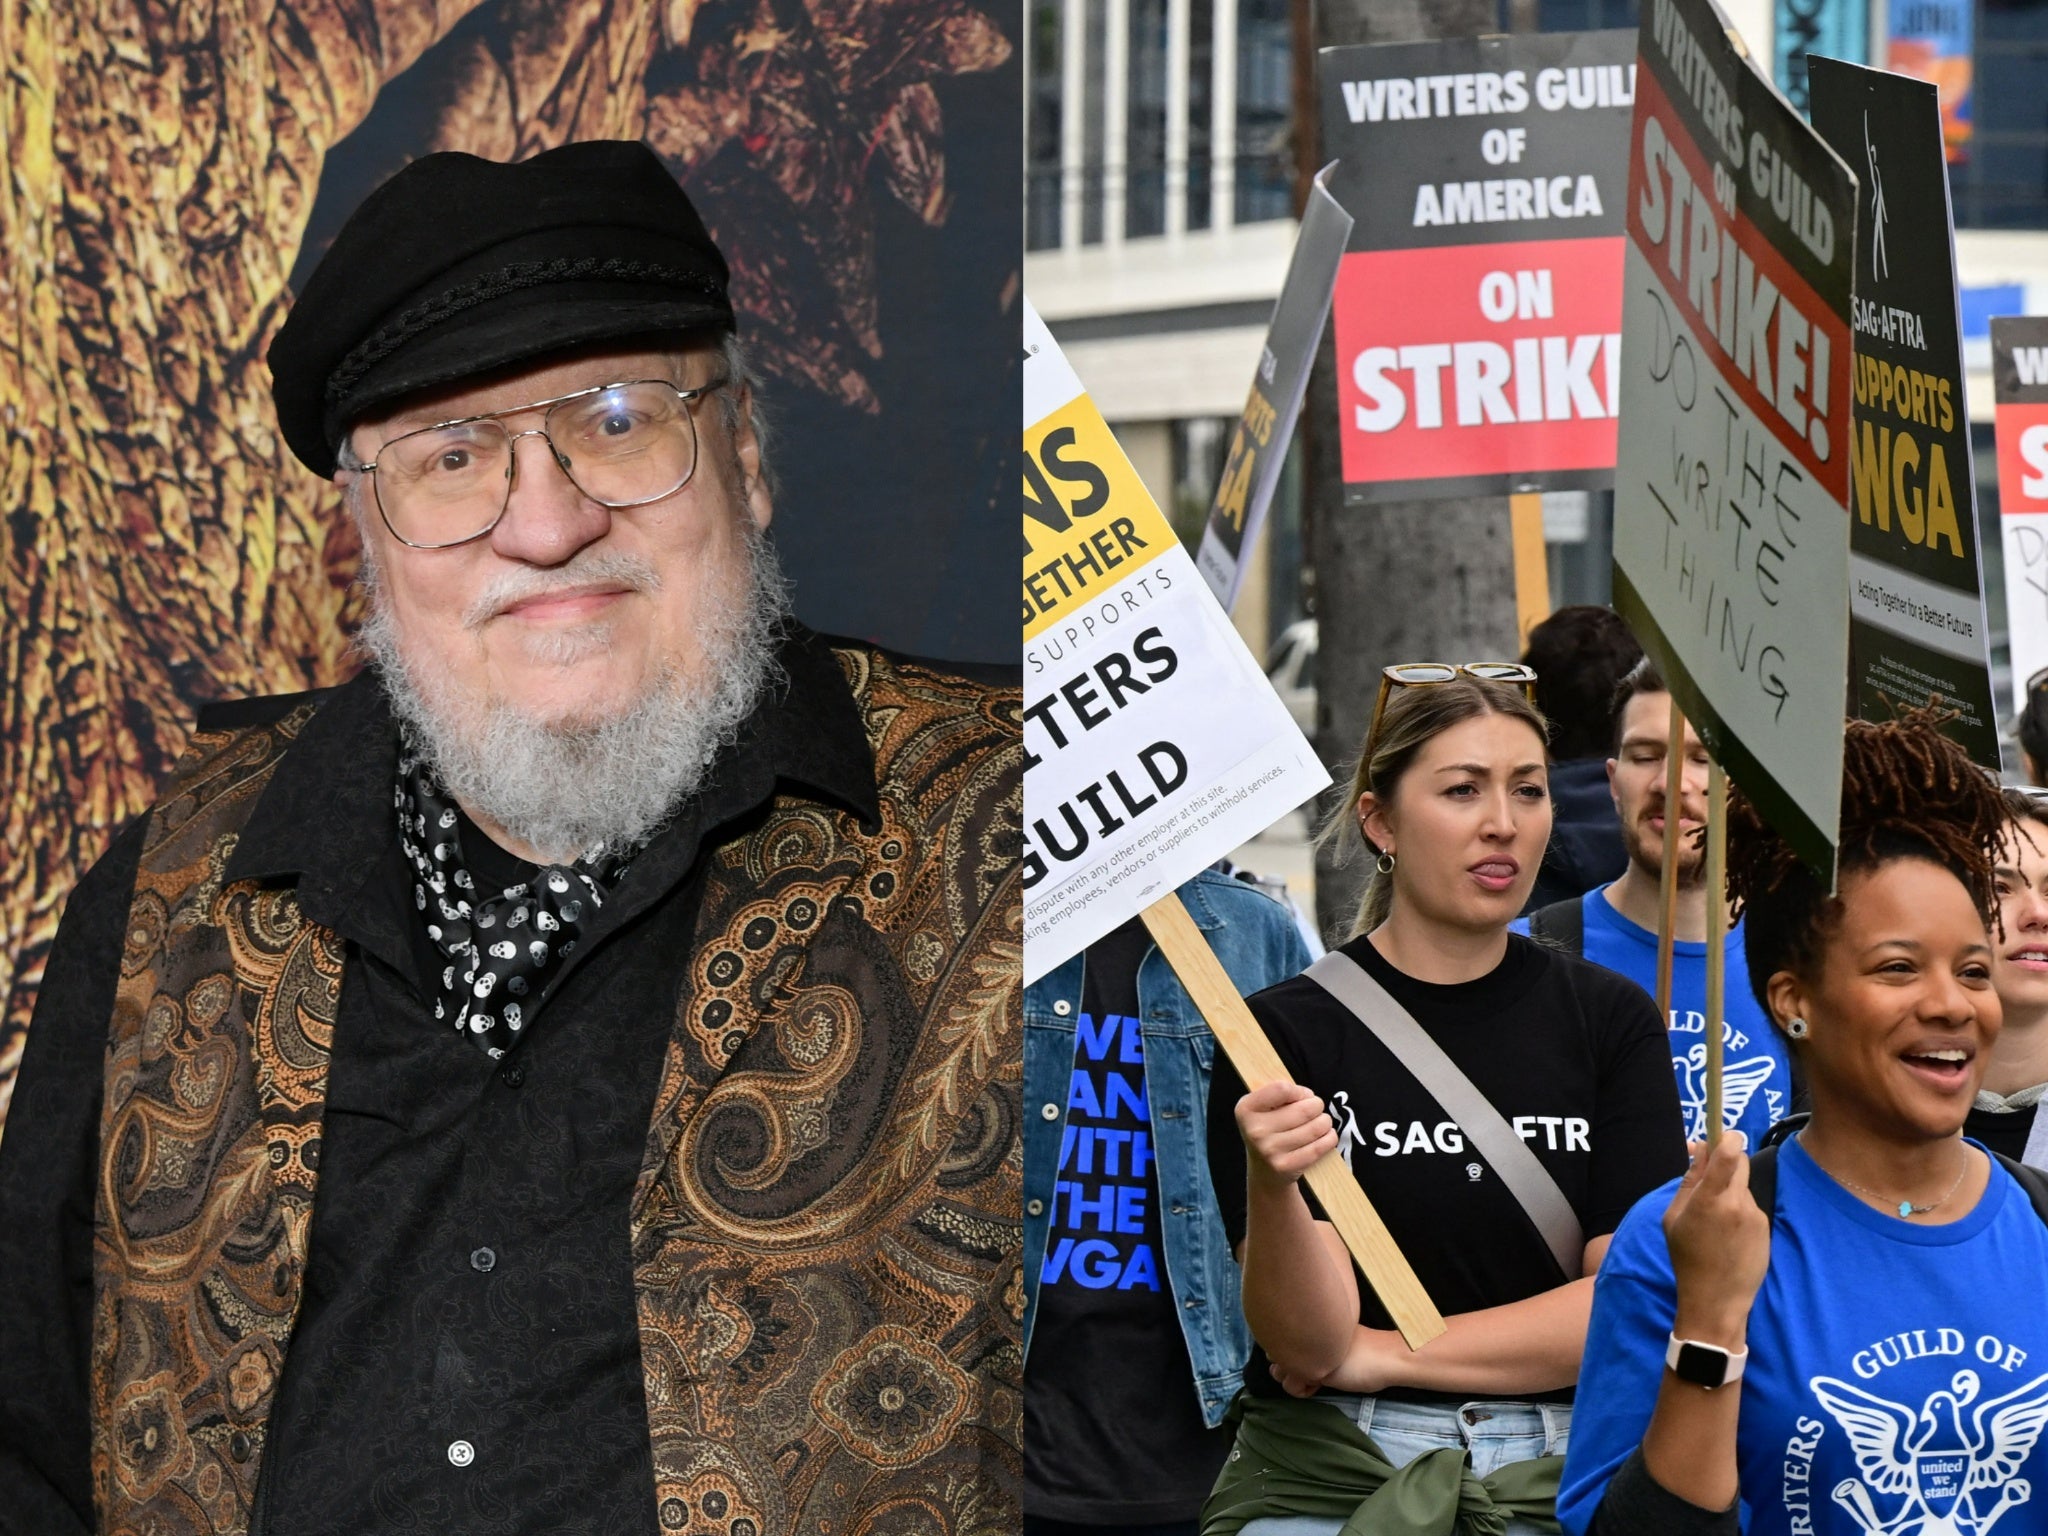 George RR Martin and people at the WGA strike picket line